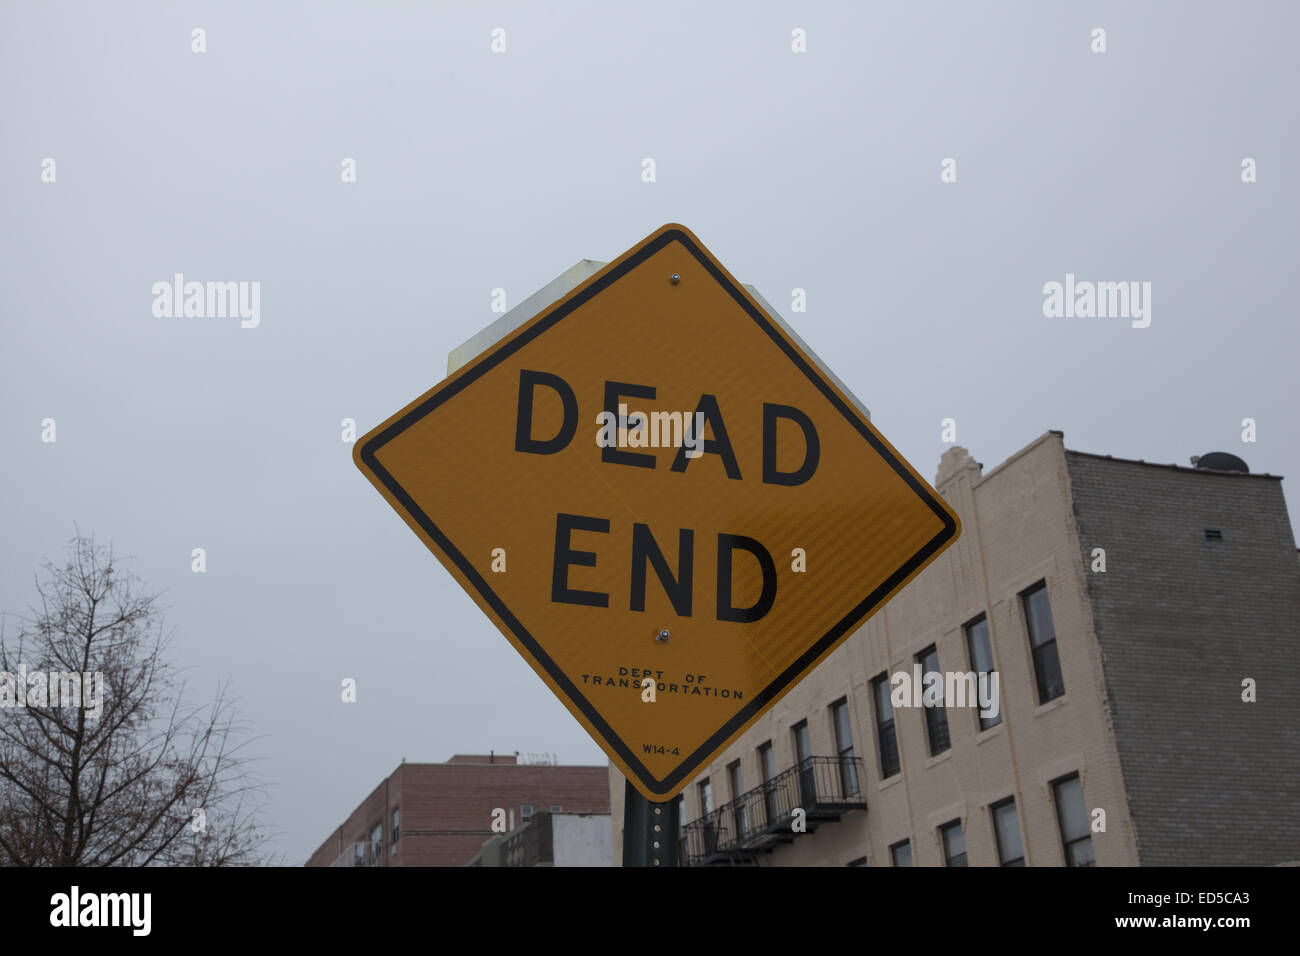 Dead End traffic sign. Stock Photo